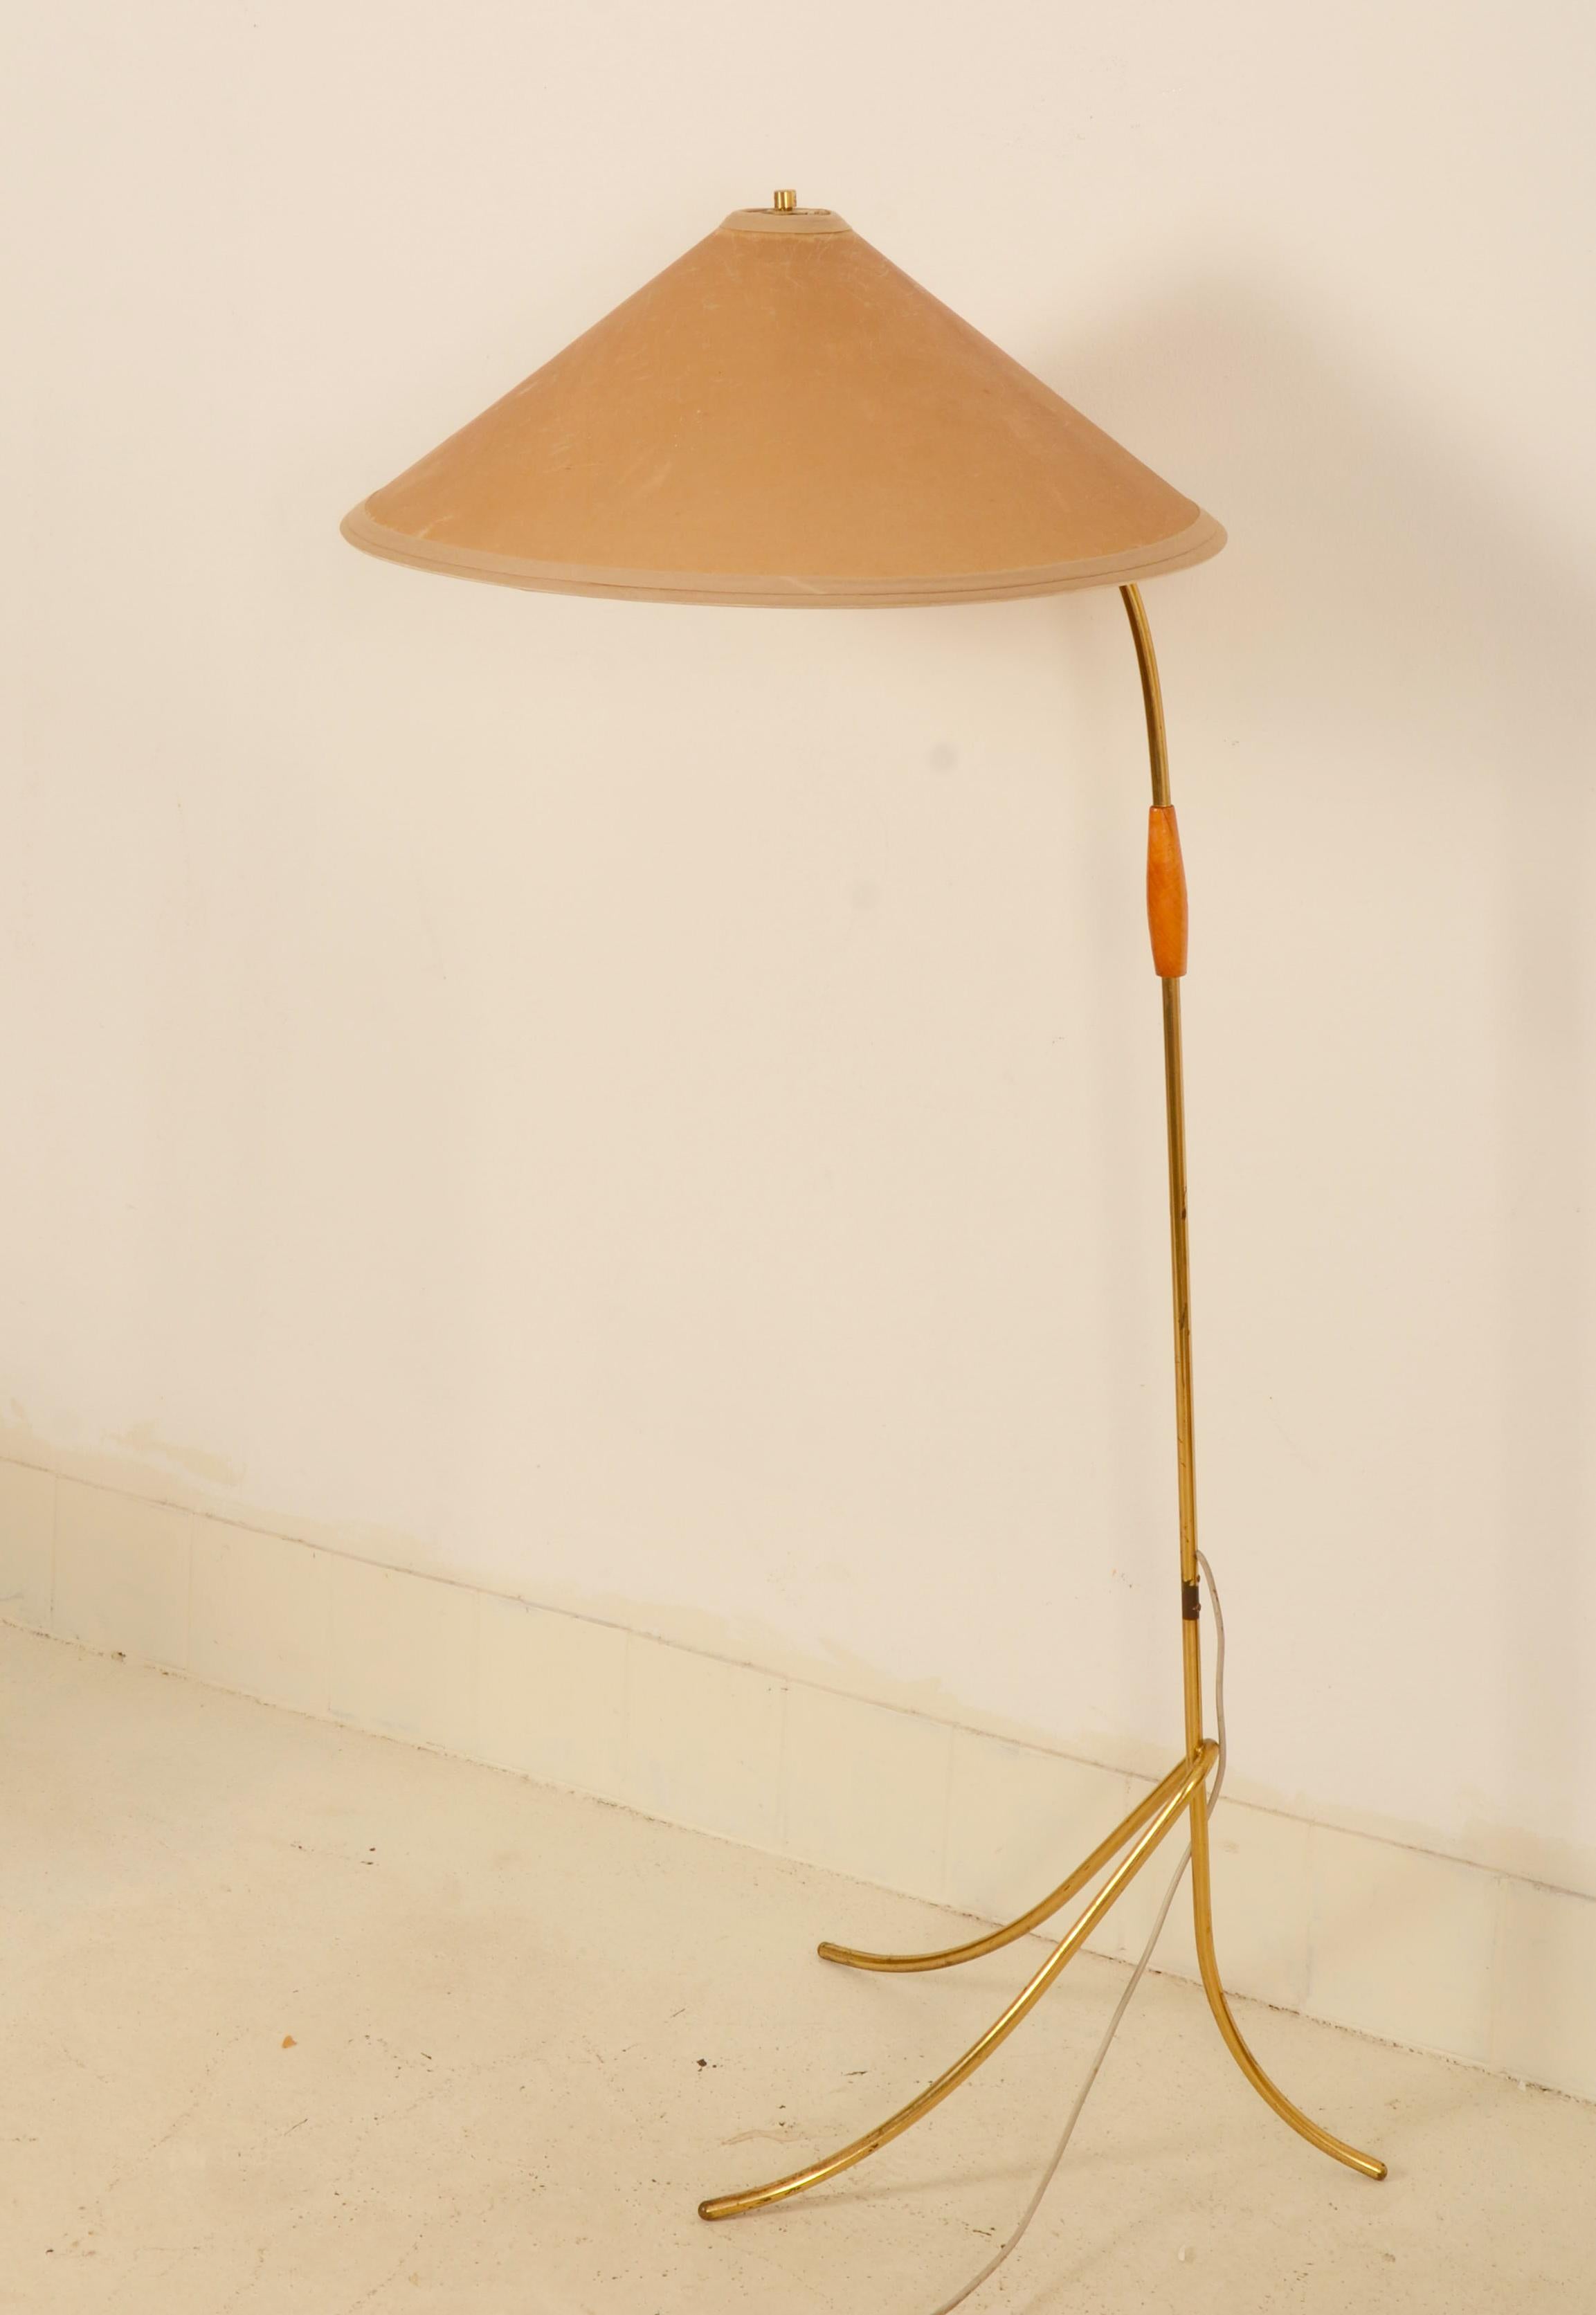 Brass tripod construction fitted with one E27 socket with switch, original parchment cone-shaped tapering, bright lampshade. Desing and manufactured by Rupert Nikoll in Vienna in the 1950s. Signs of age and wear, slight traces of oxidation